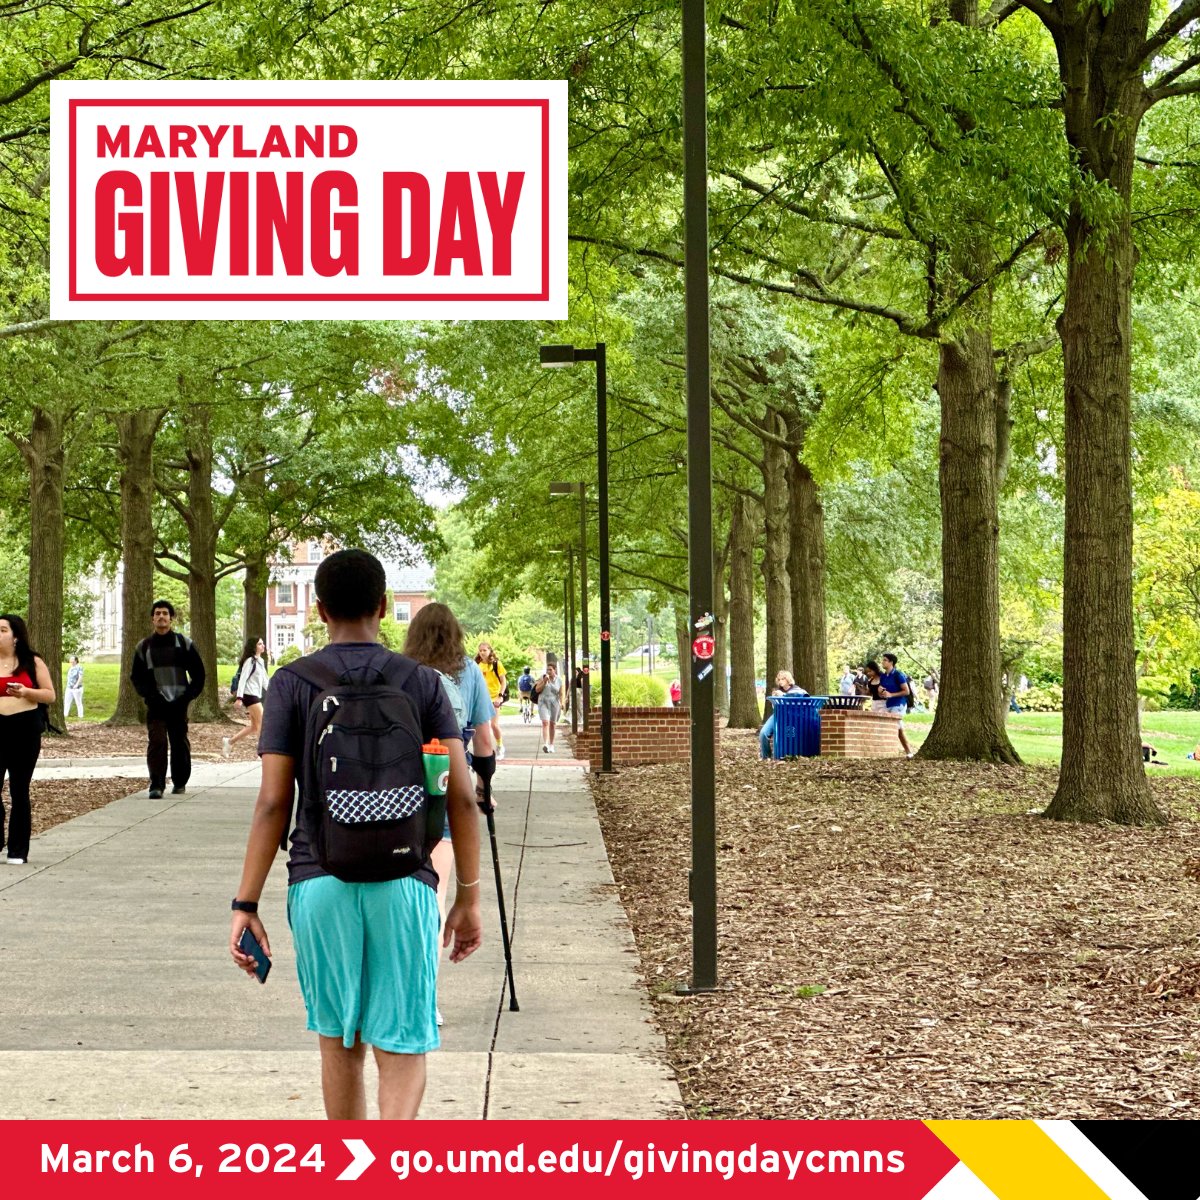 #GivingDayUMD is your chance to support and uplift #ScienceTerps! Even small gifts can have a huge impact. Learn how you can give back to our department programs and support geology students, particularly through our two endowment funds: geol.umd.edu/giving